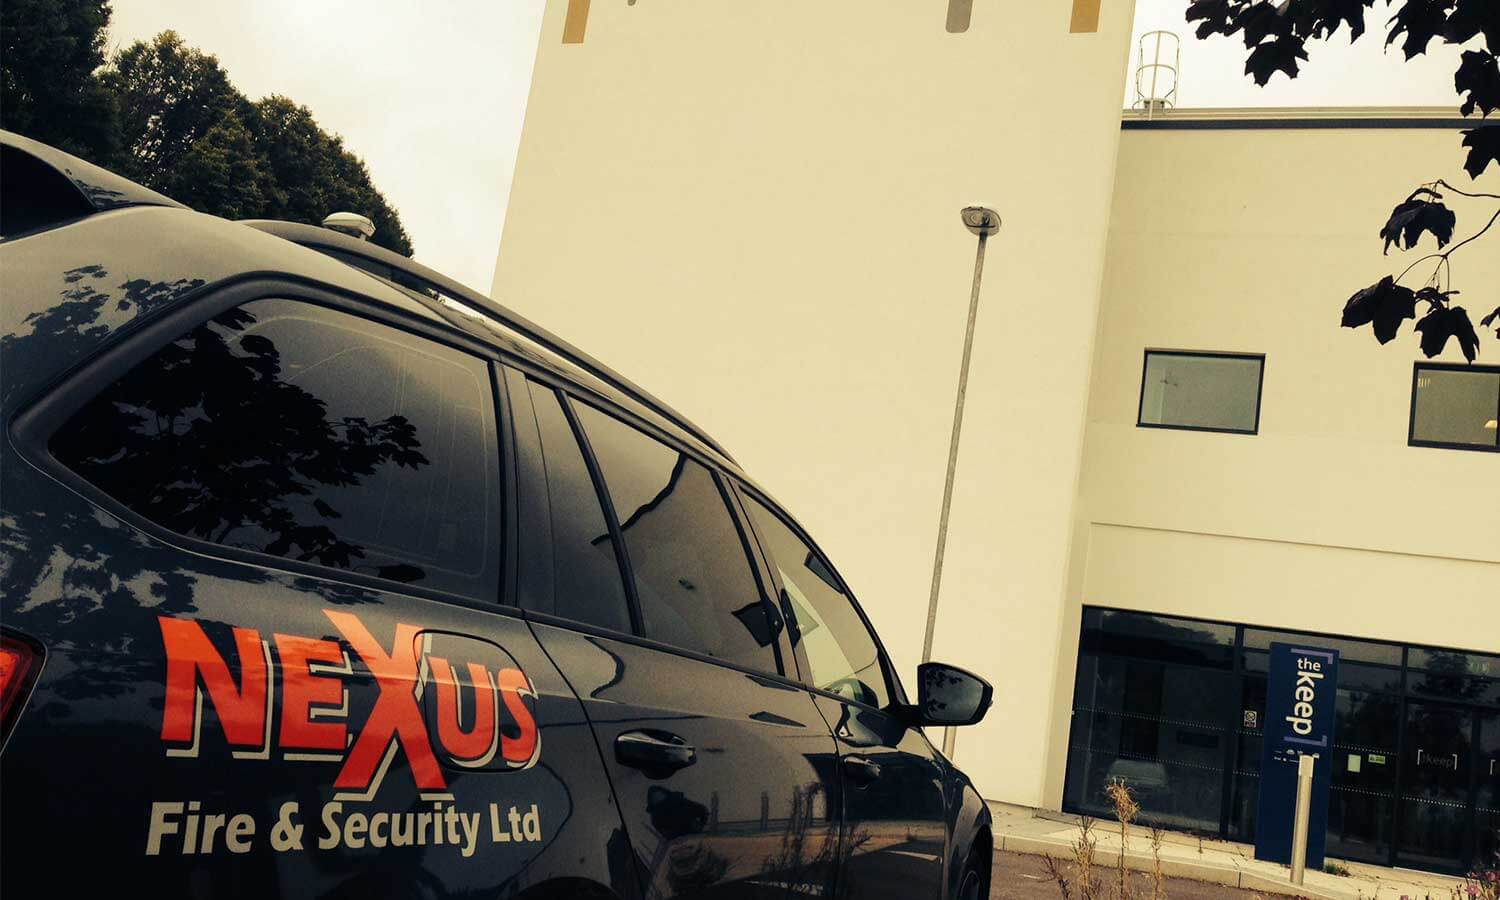 About Nexus Fire & Security